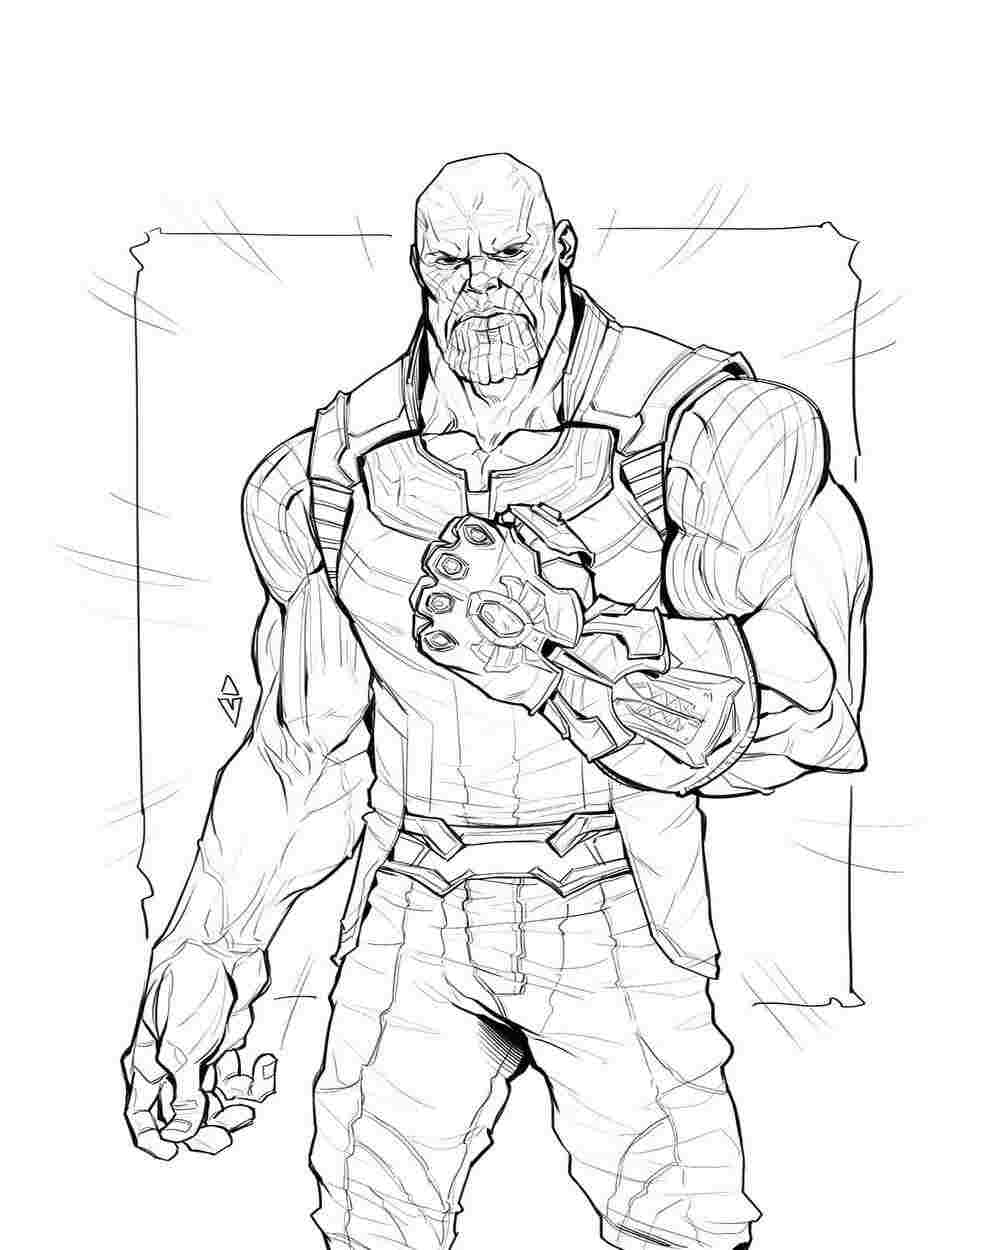 Superpower Thanos from the Avengers Infinity War Coloring Pages - Avengers Coloring  Pages - Coloring Pages For Kids And Adults